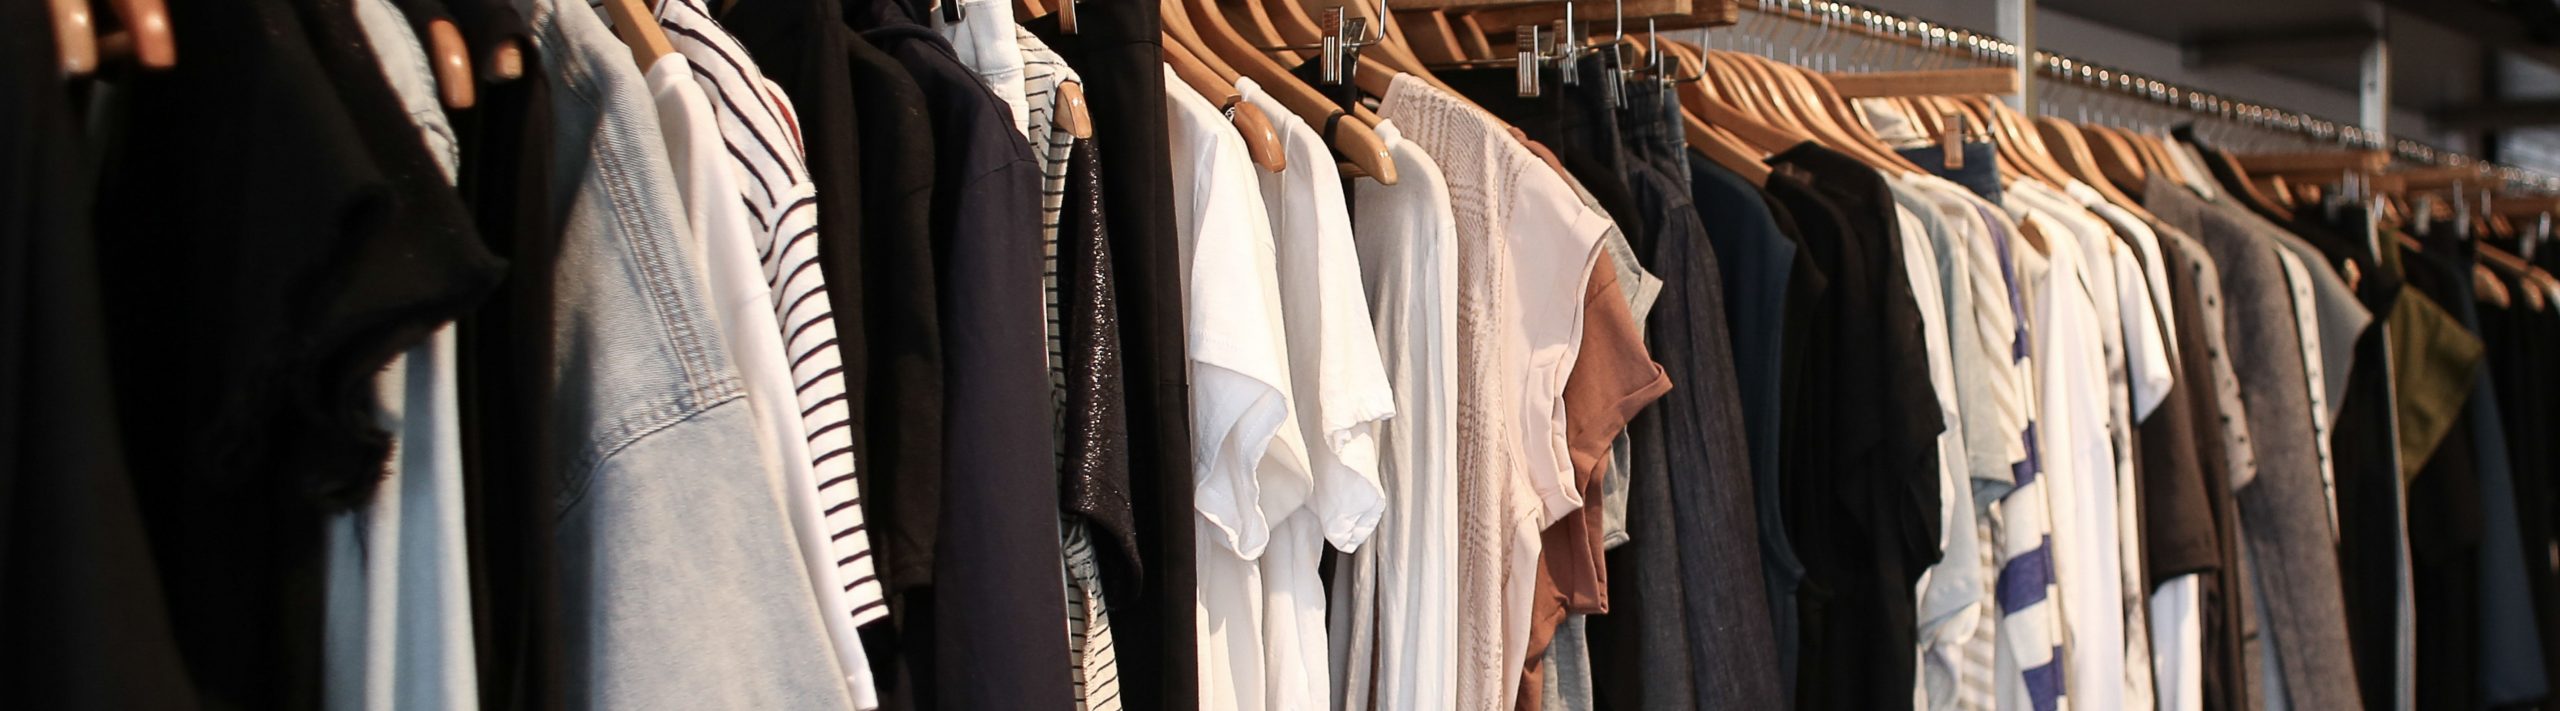 clothes on clothing rack